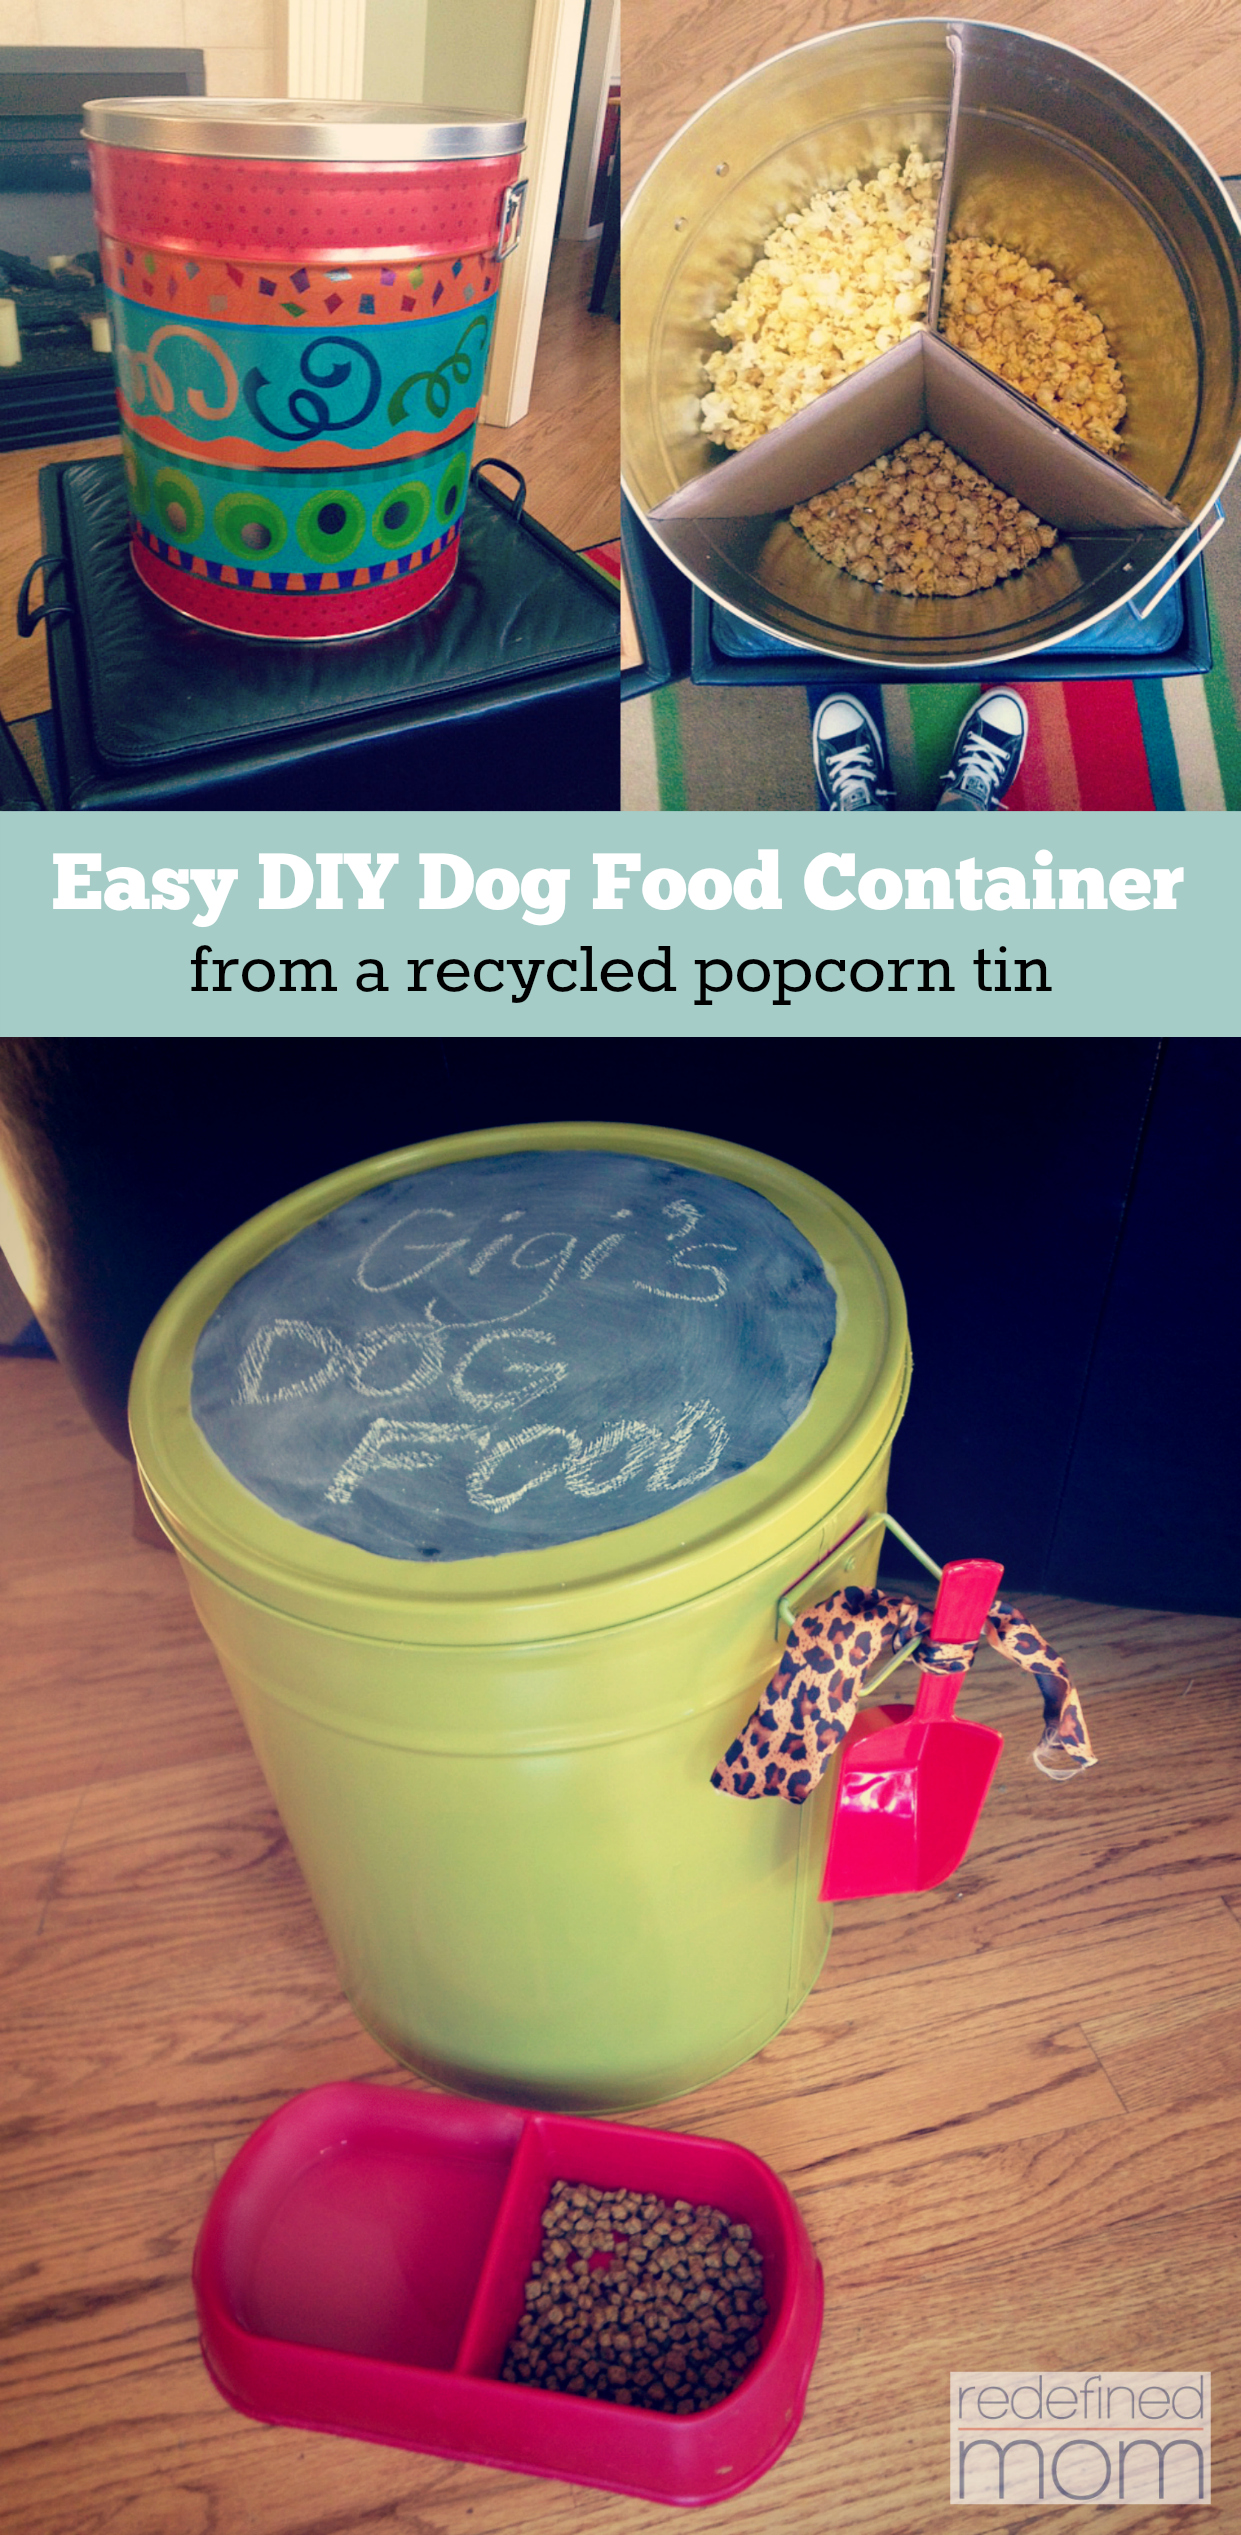 DIY Dog Food Container from a Recycled Popcorn Tin